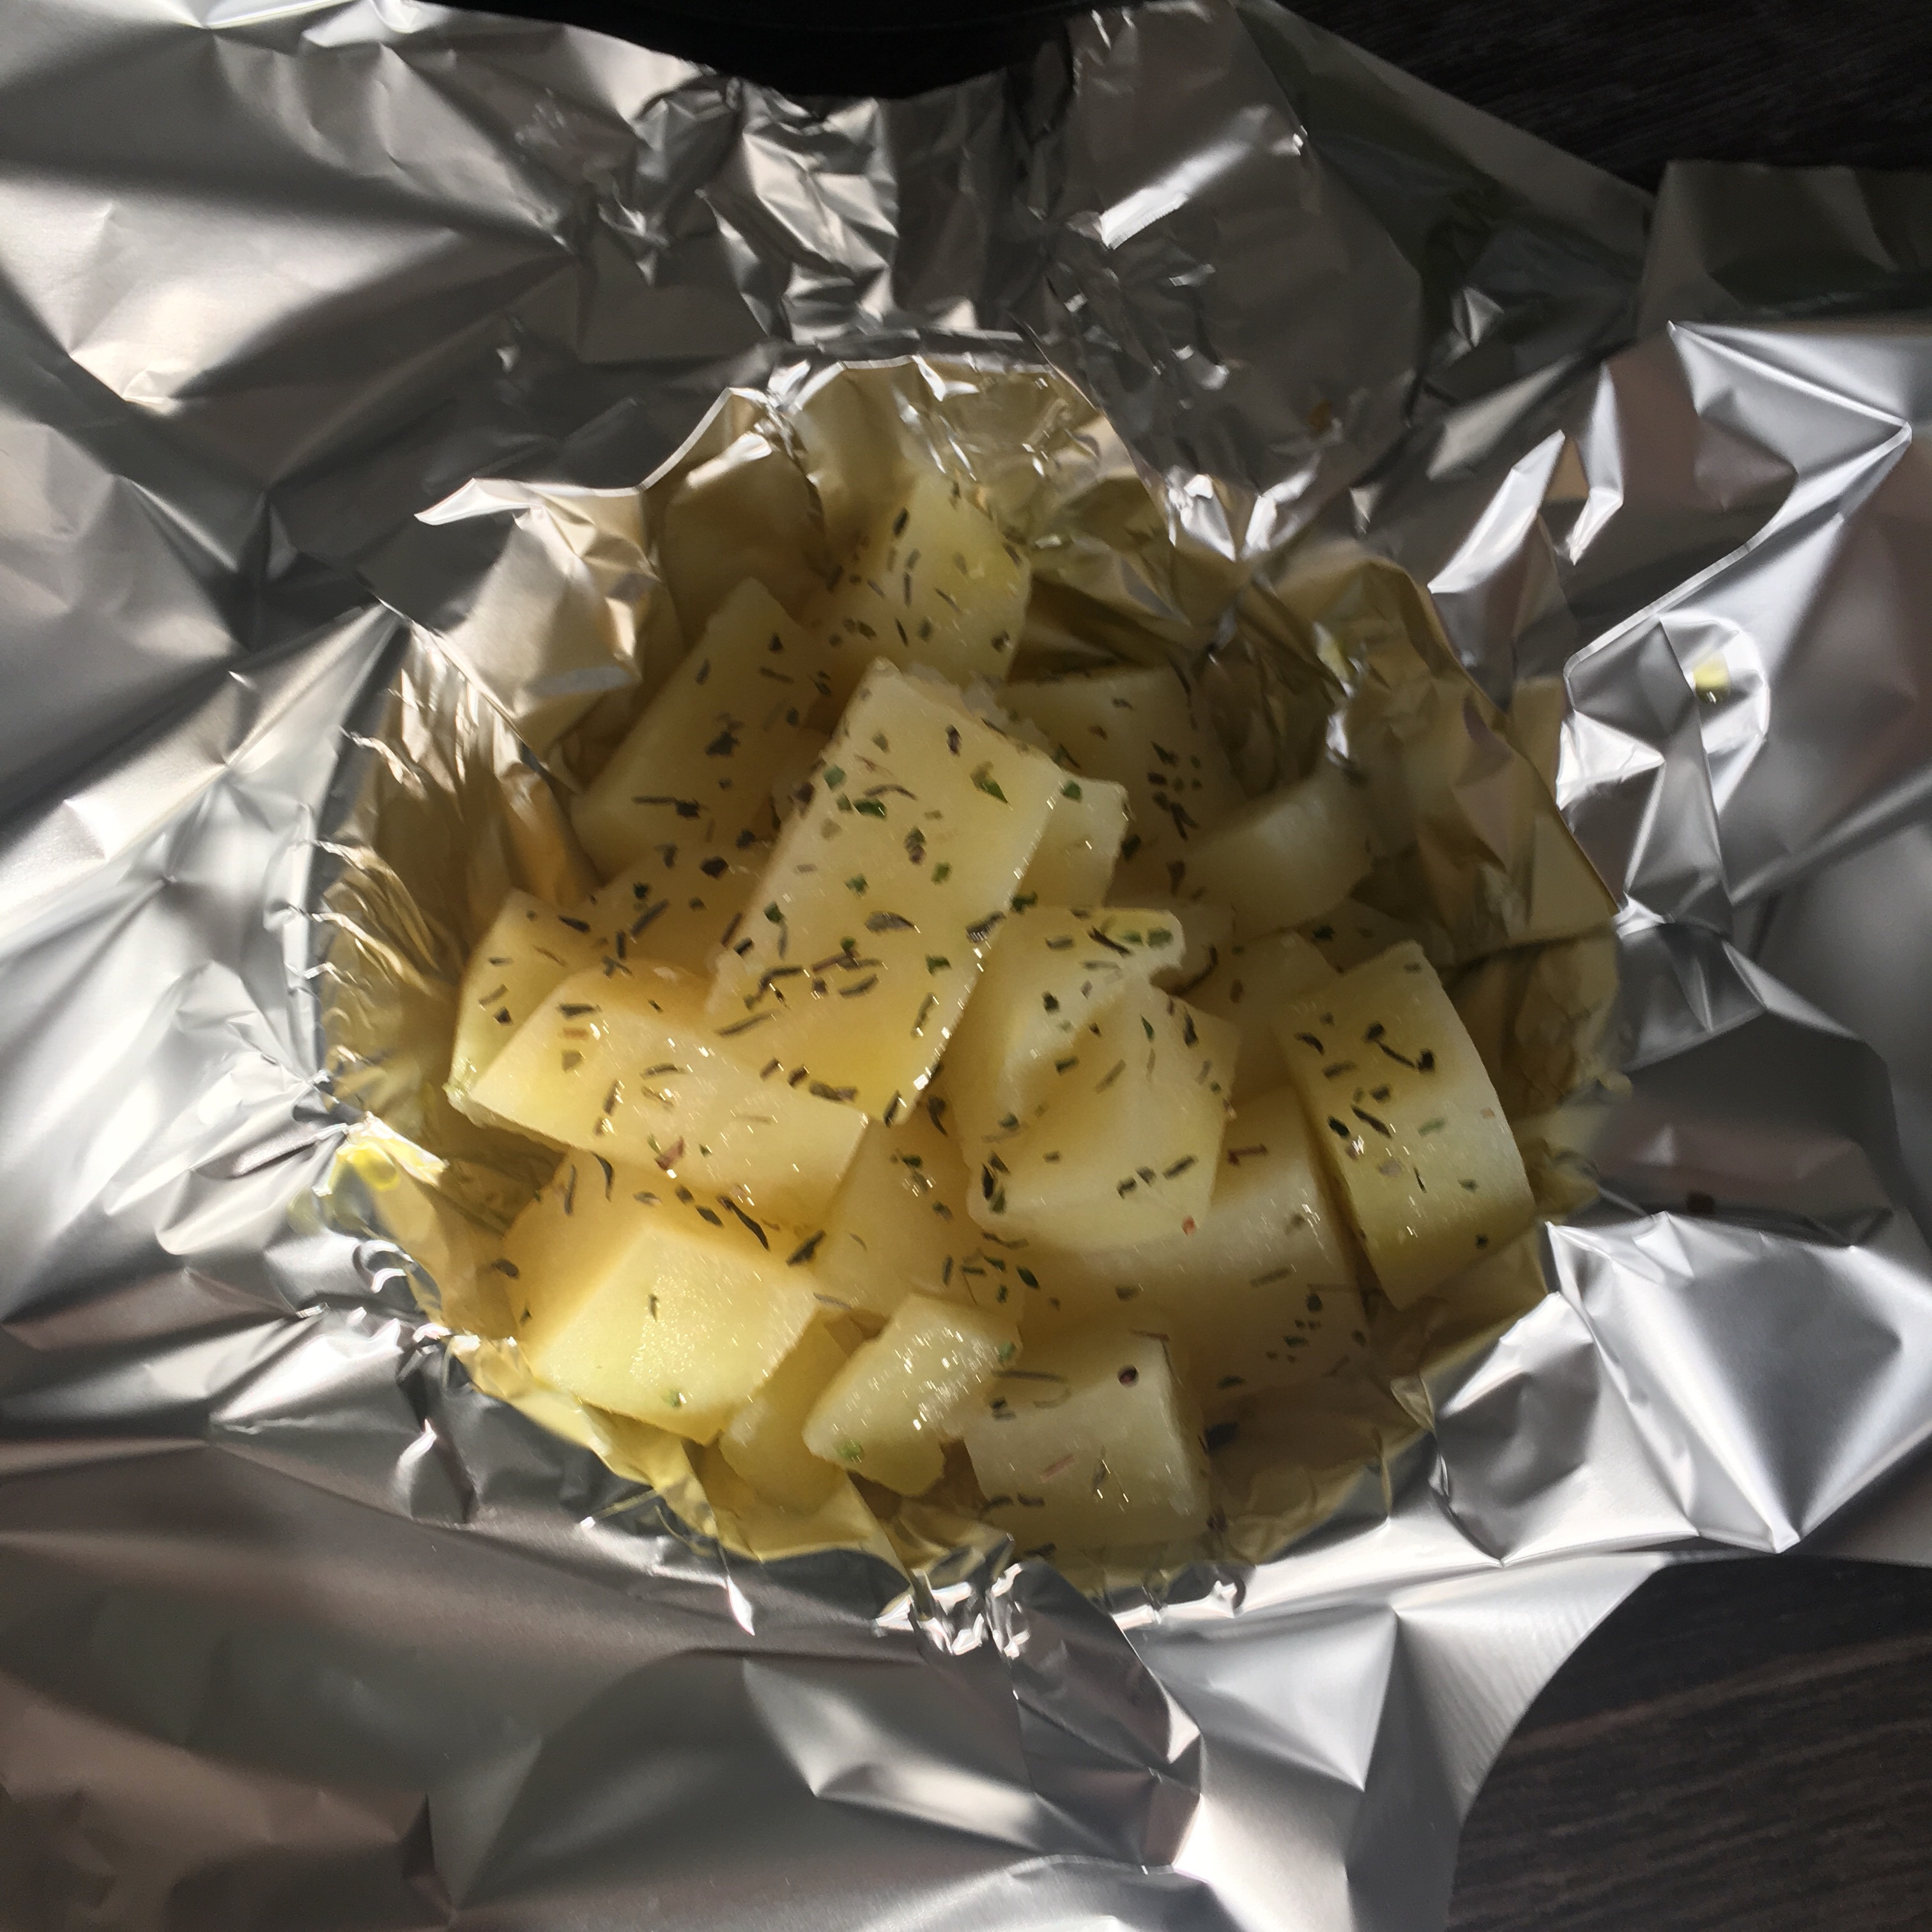 Boiled potatoes with mixed herbs and olive oil